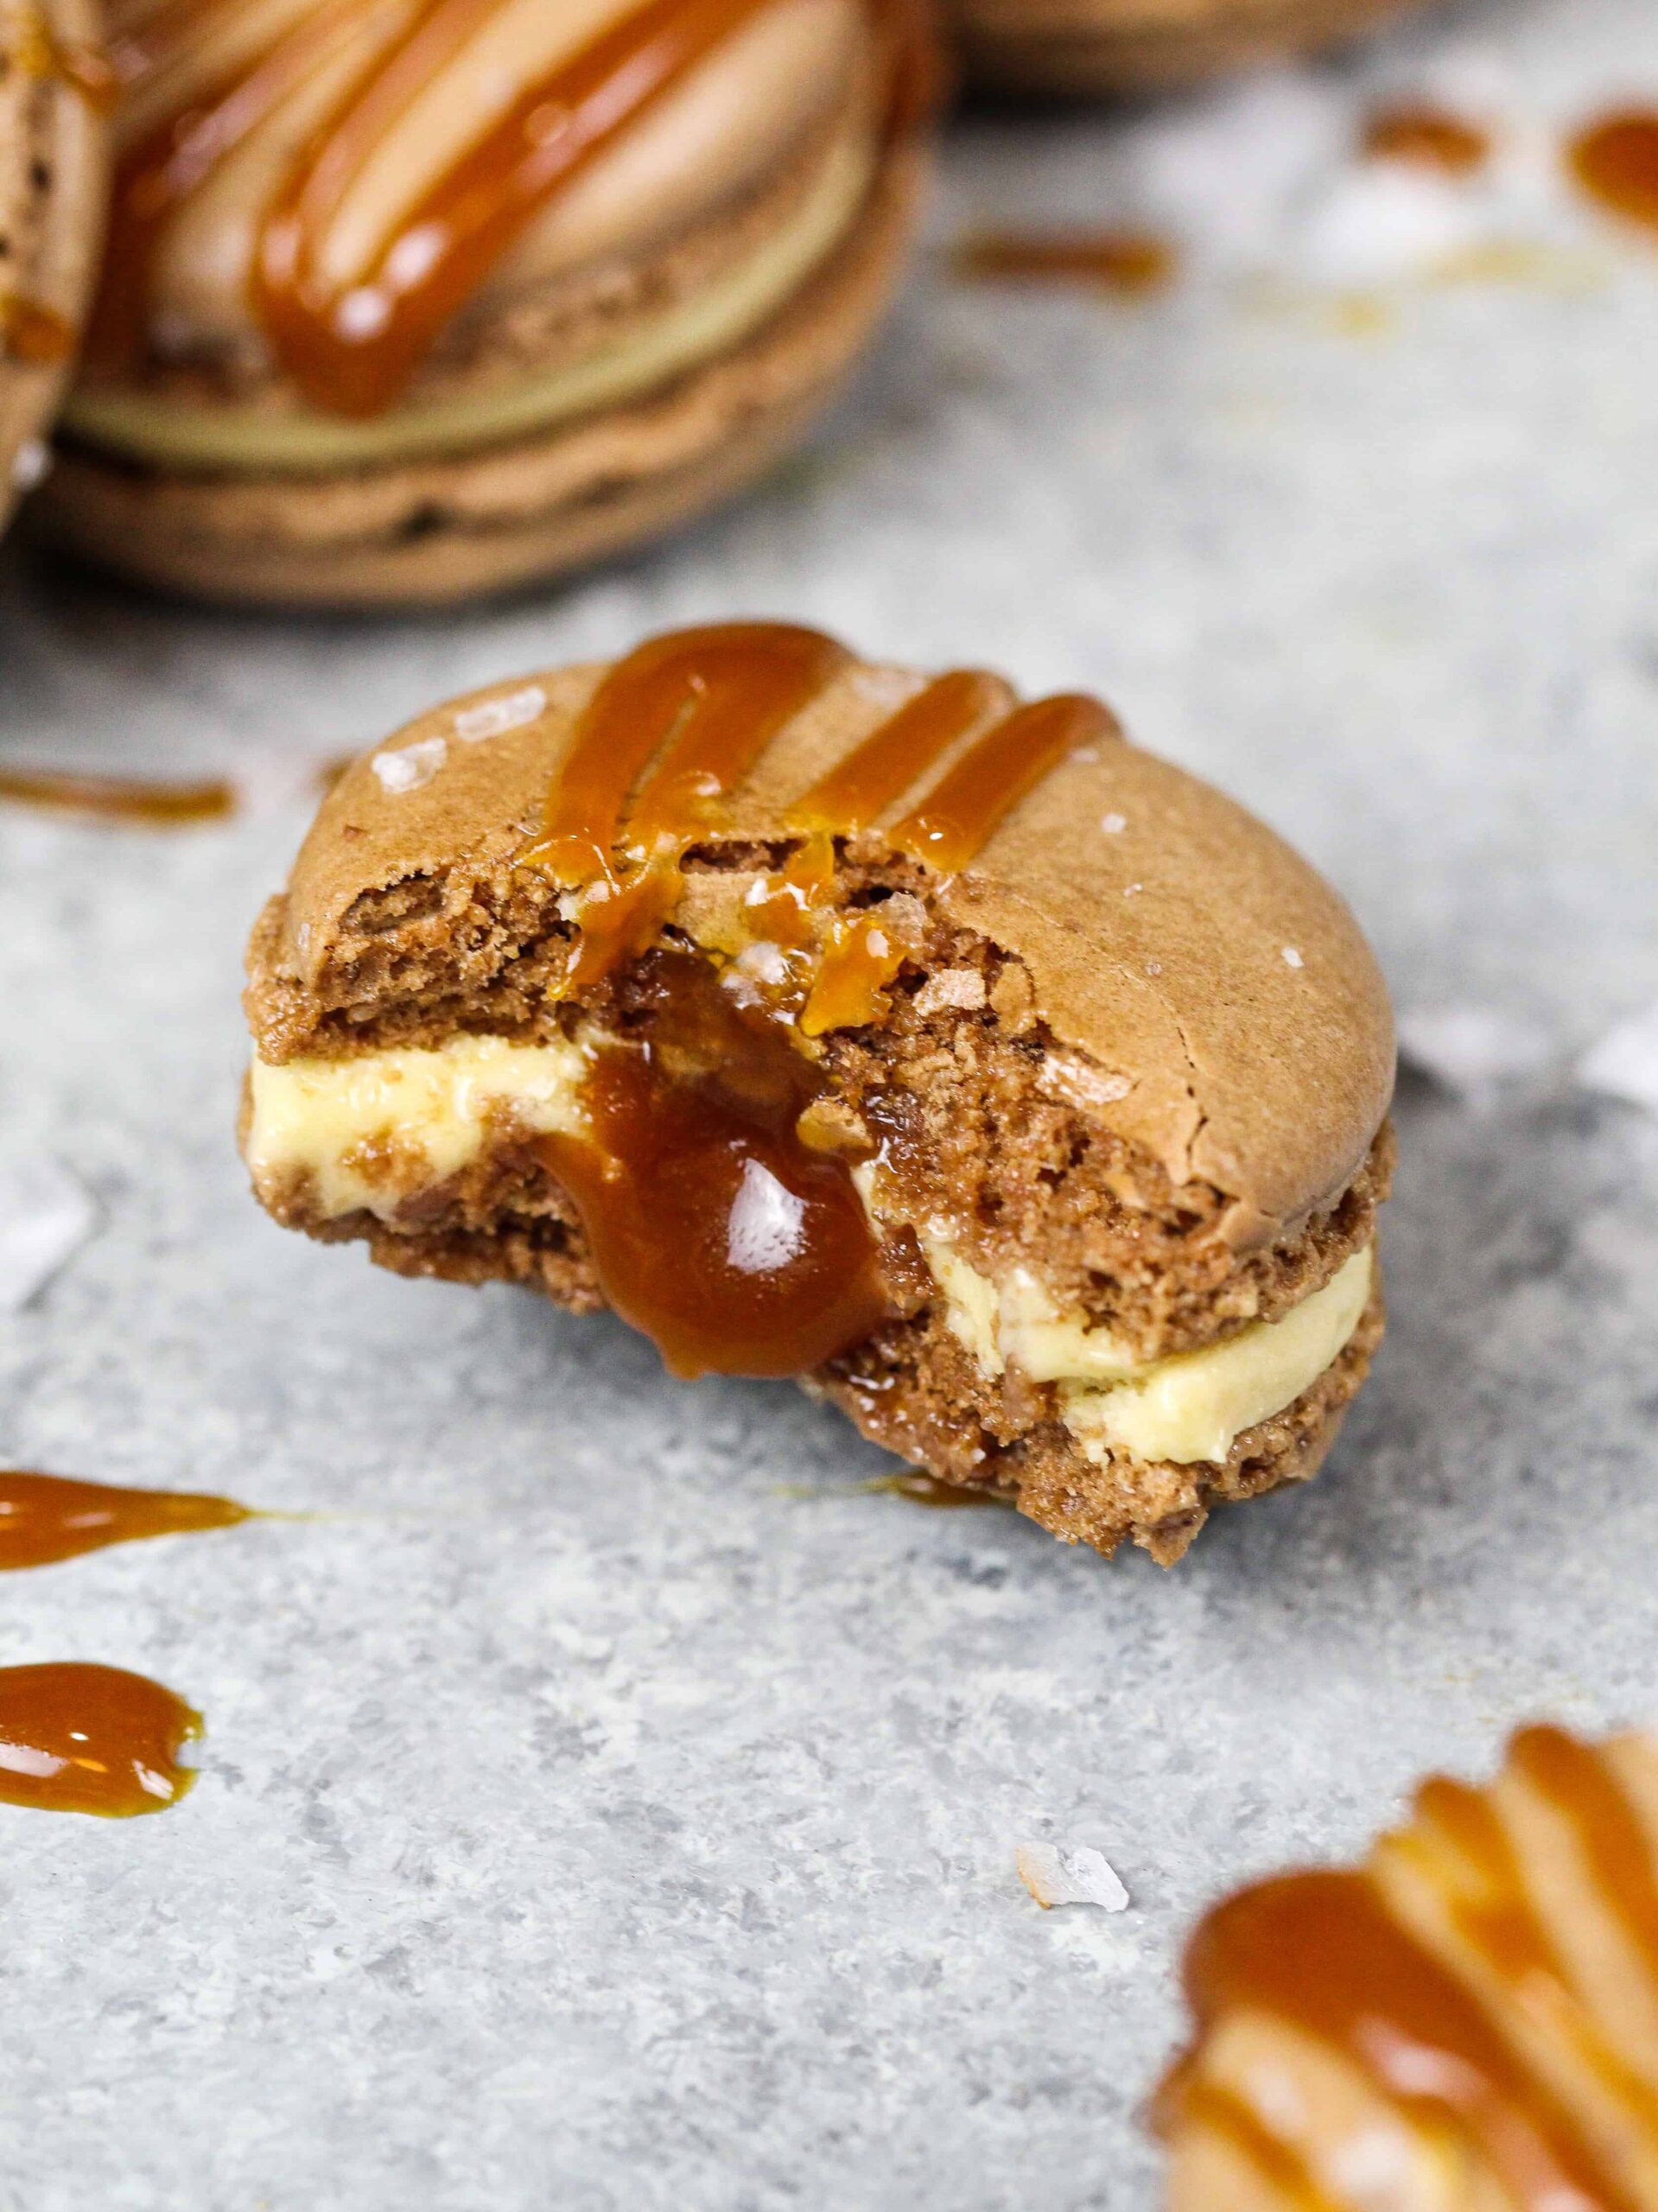 image of a salted caramel macaron that's been bitten into to show how full the macaron shell is